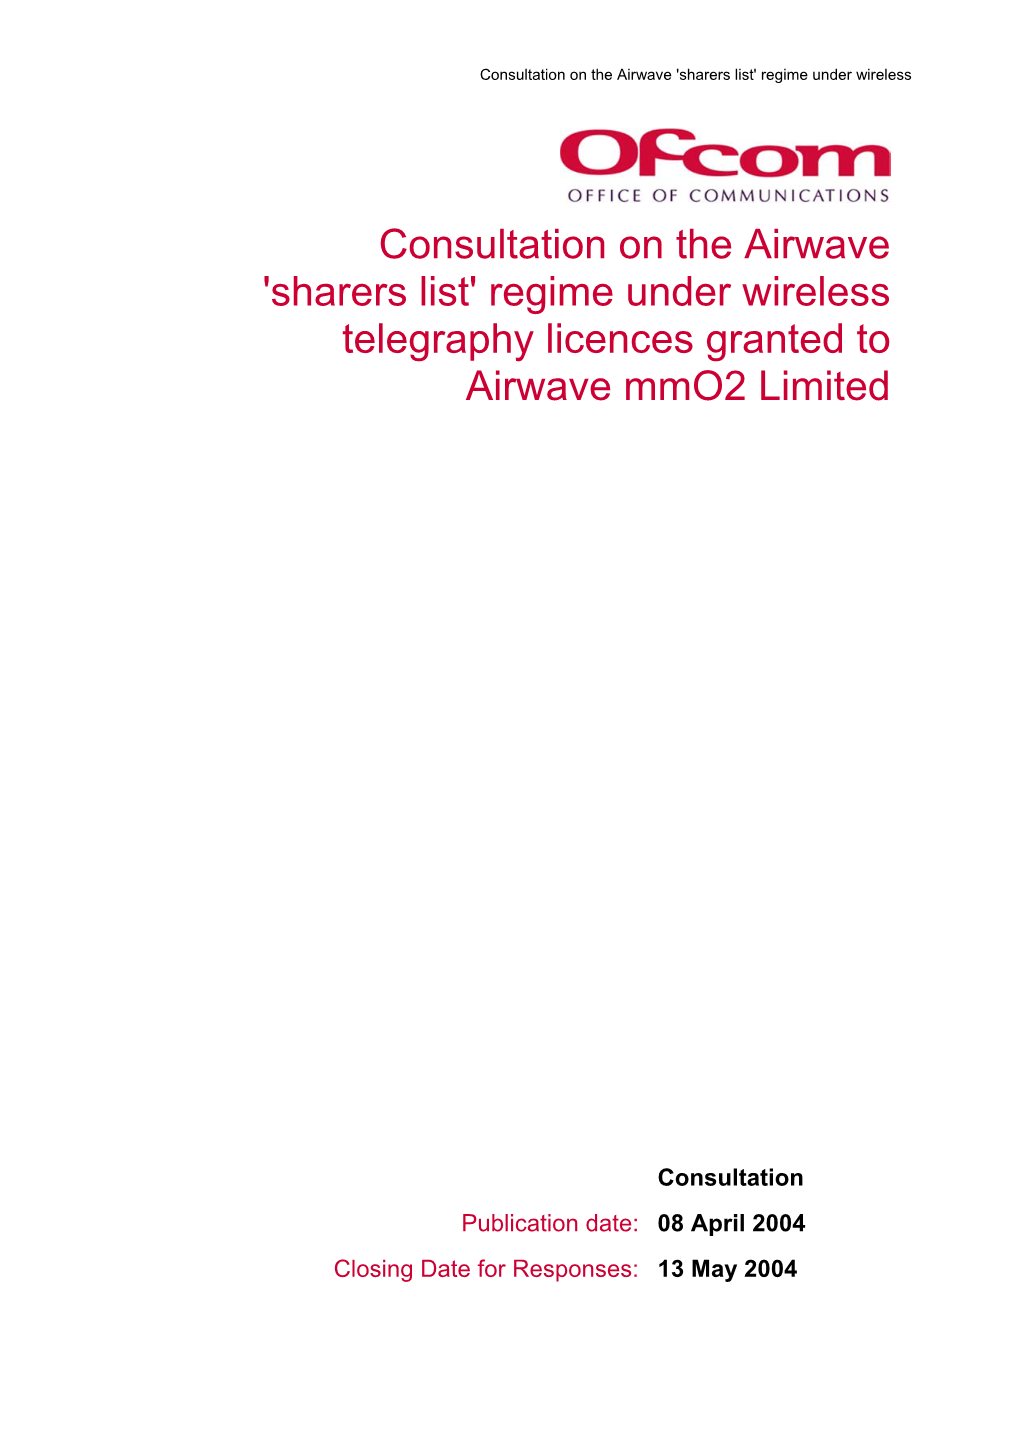 Regime Under Wireless Telegraphy Licences Granted to Airwave Mmo2 Limited